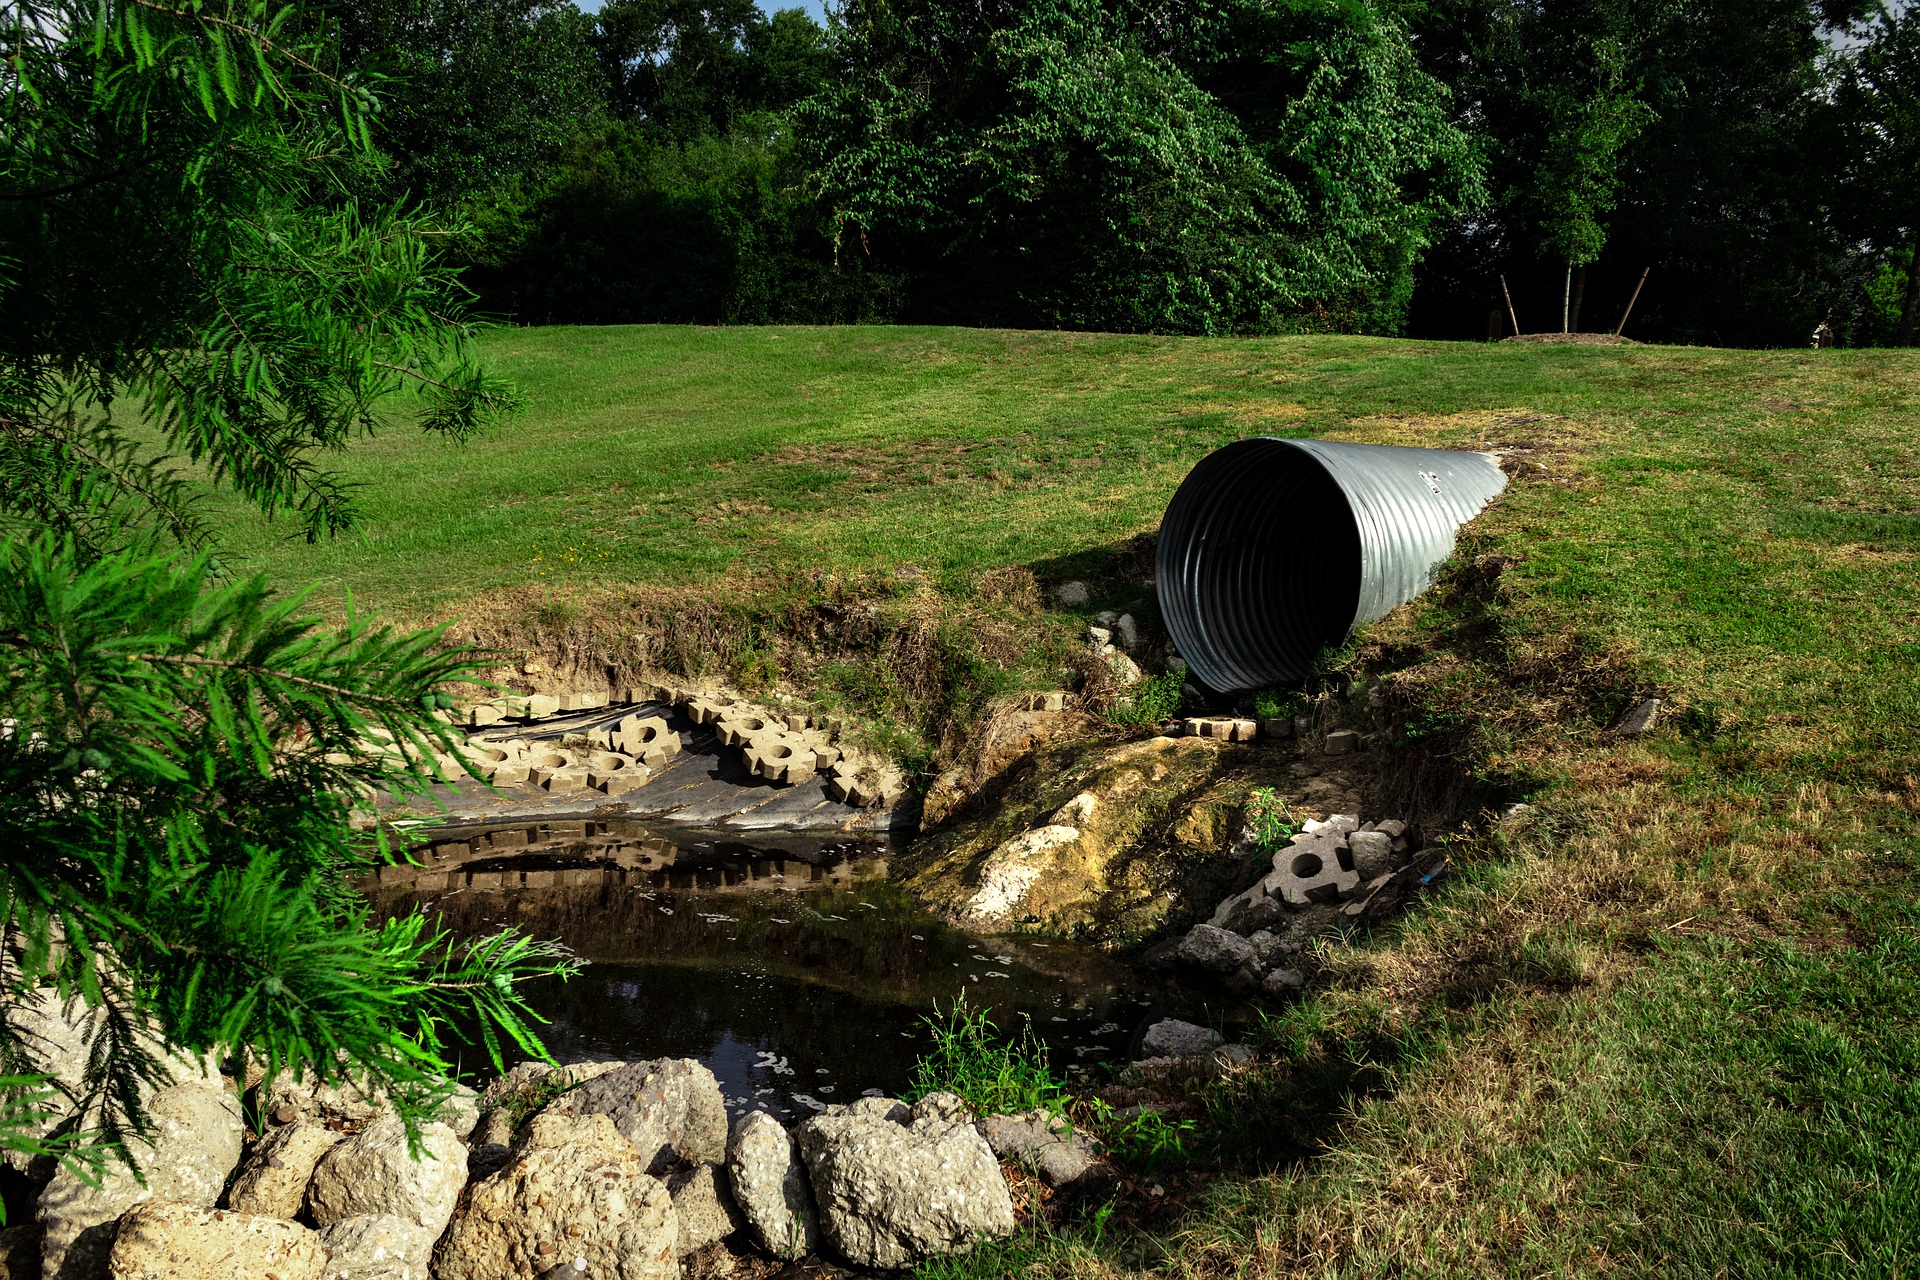 sewage-pipe-polluted-water-3465090_1920